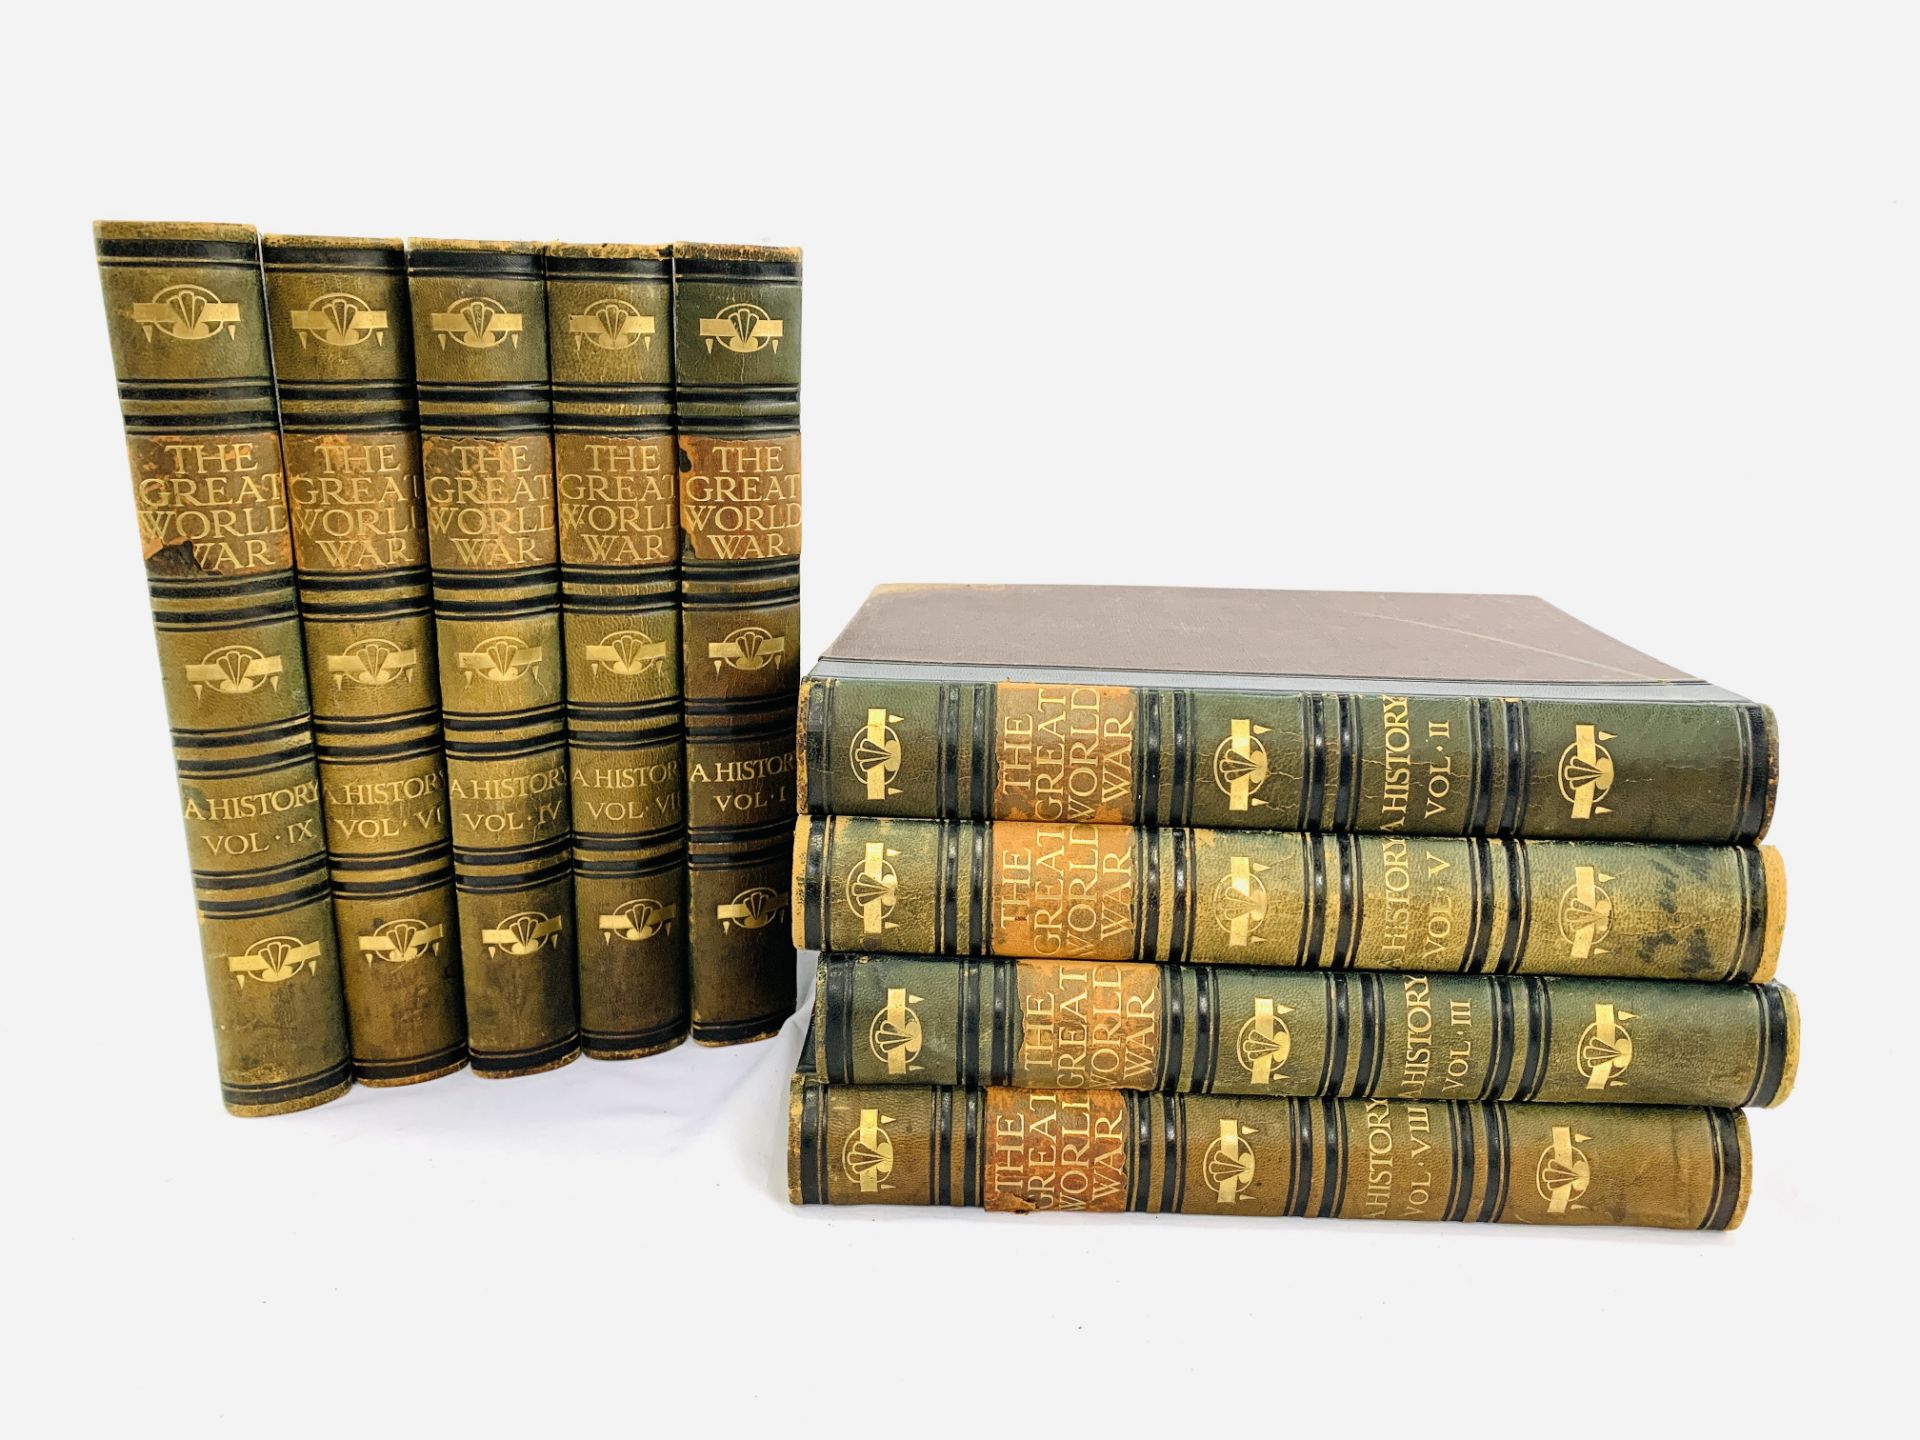 Great World War edited by Frank Mumby in nine volumes